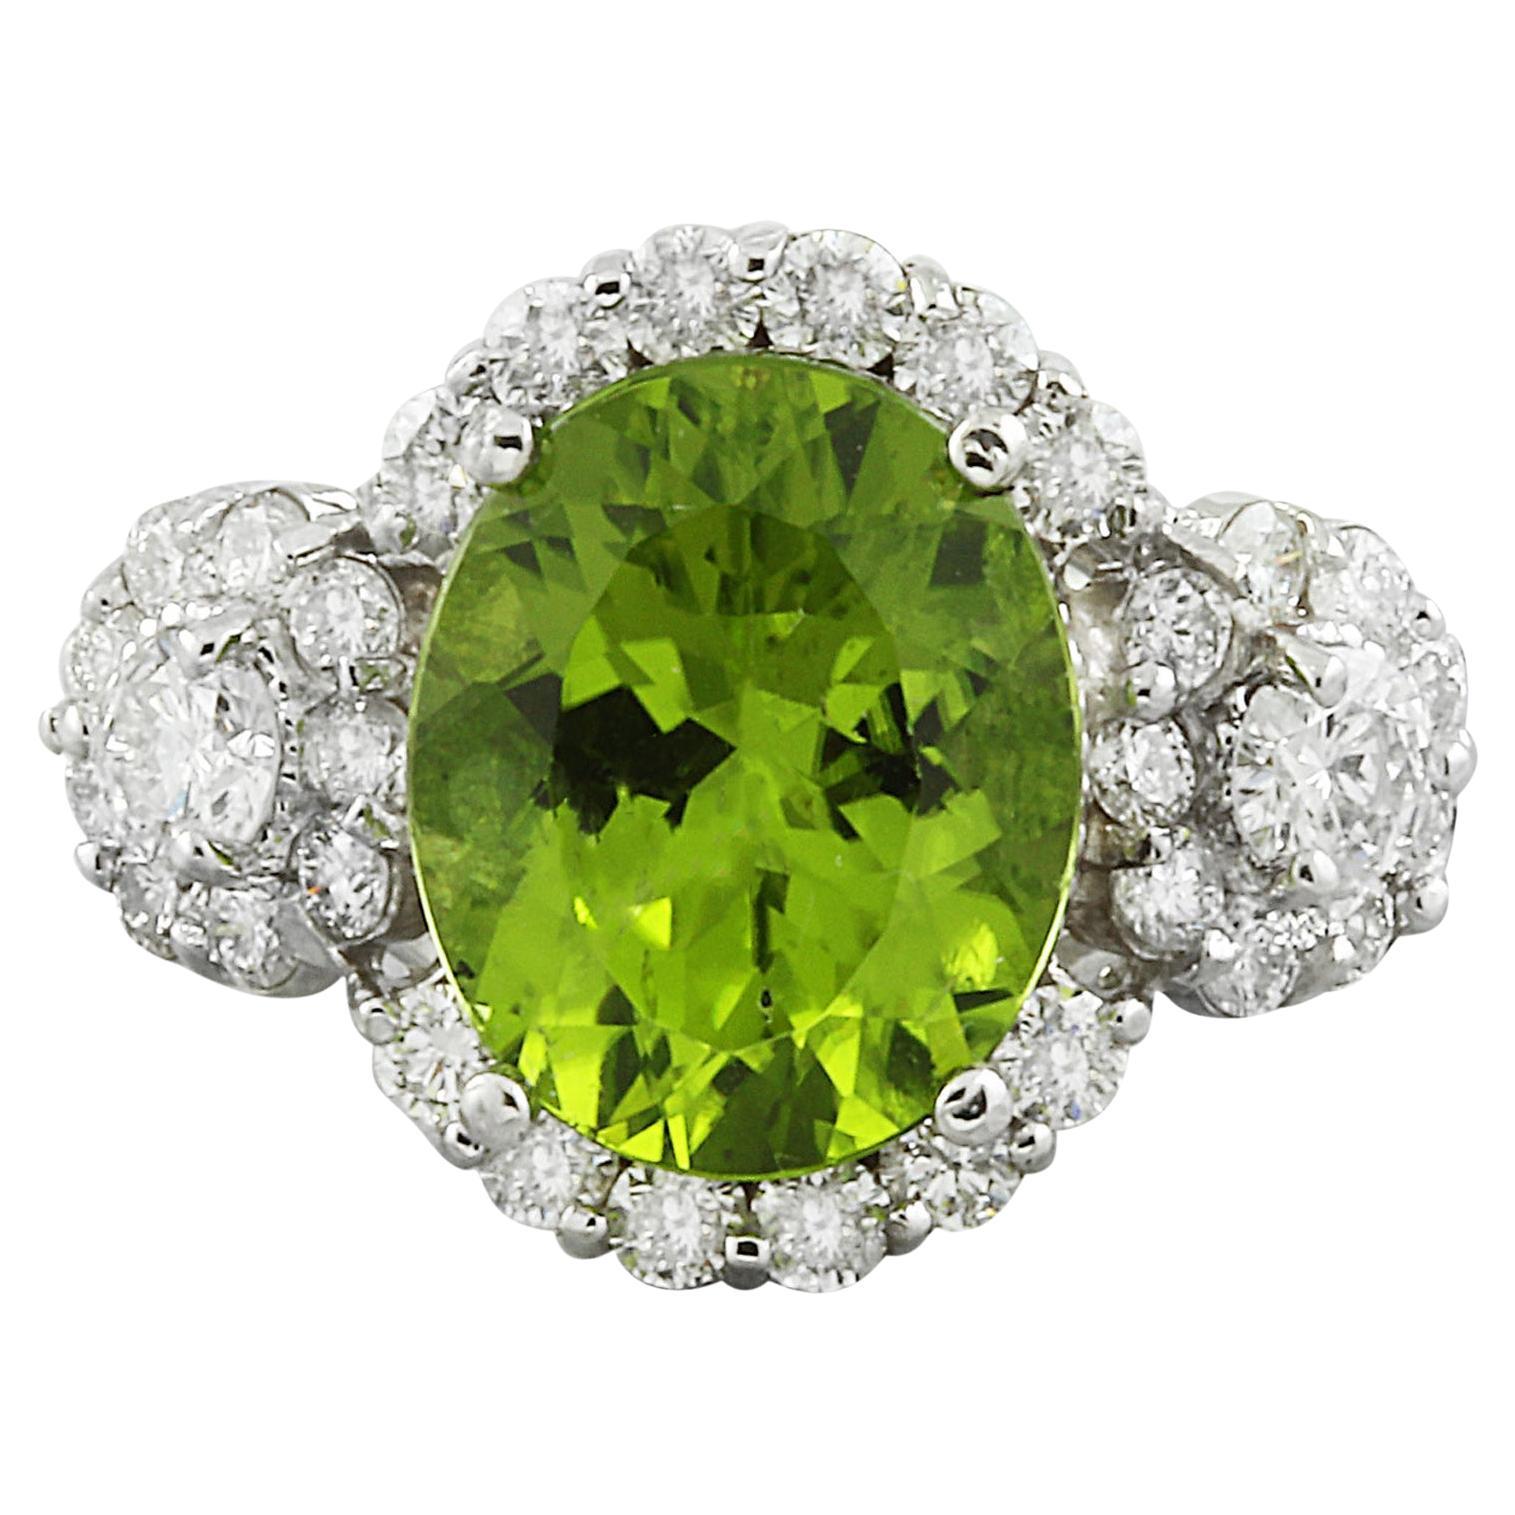 Exquisite Natural Peridot Diamond Ring In 14 Karat Solid White Gold 